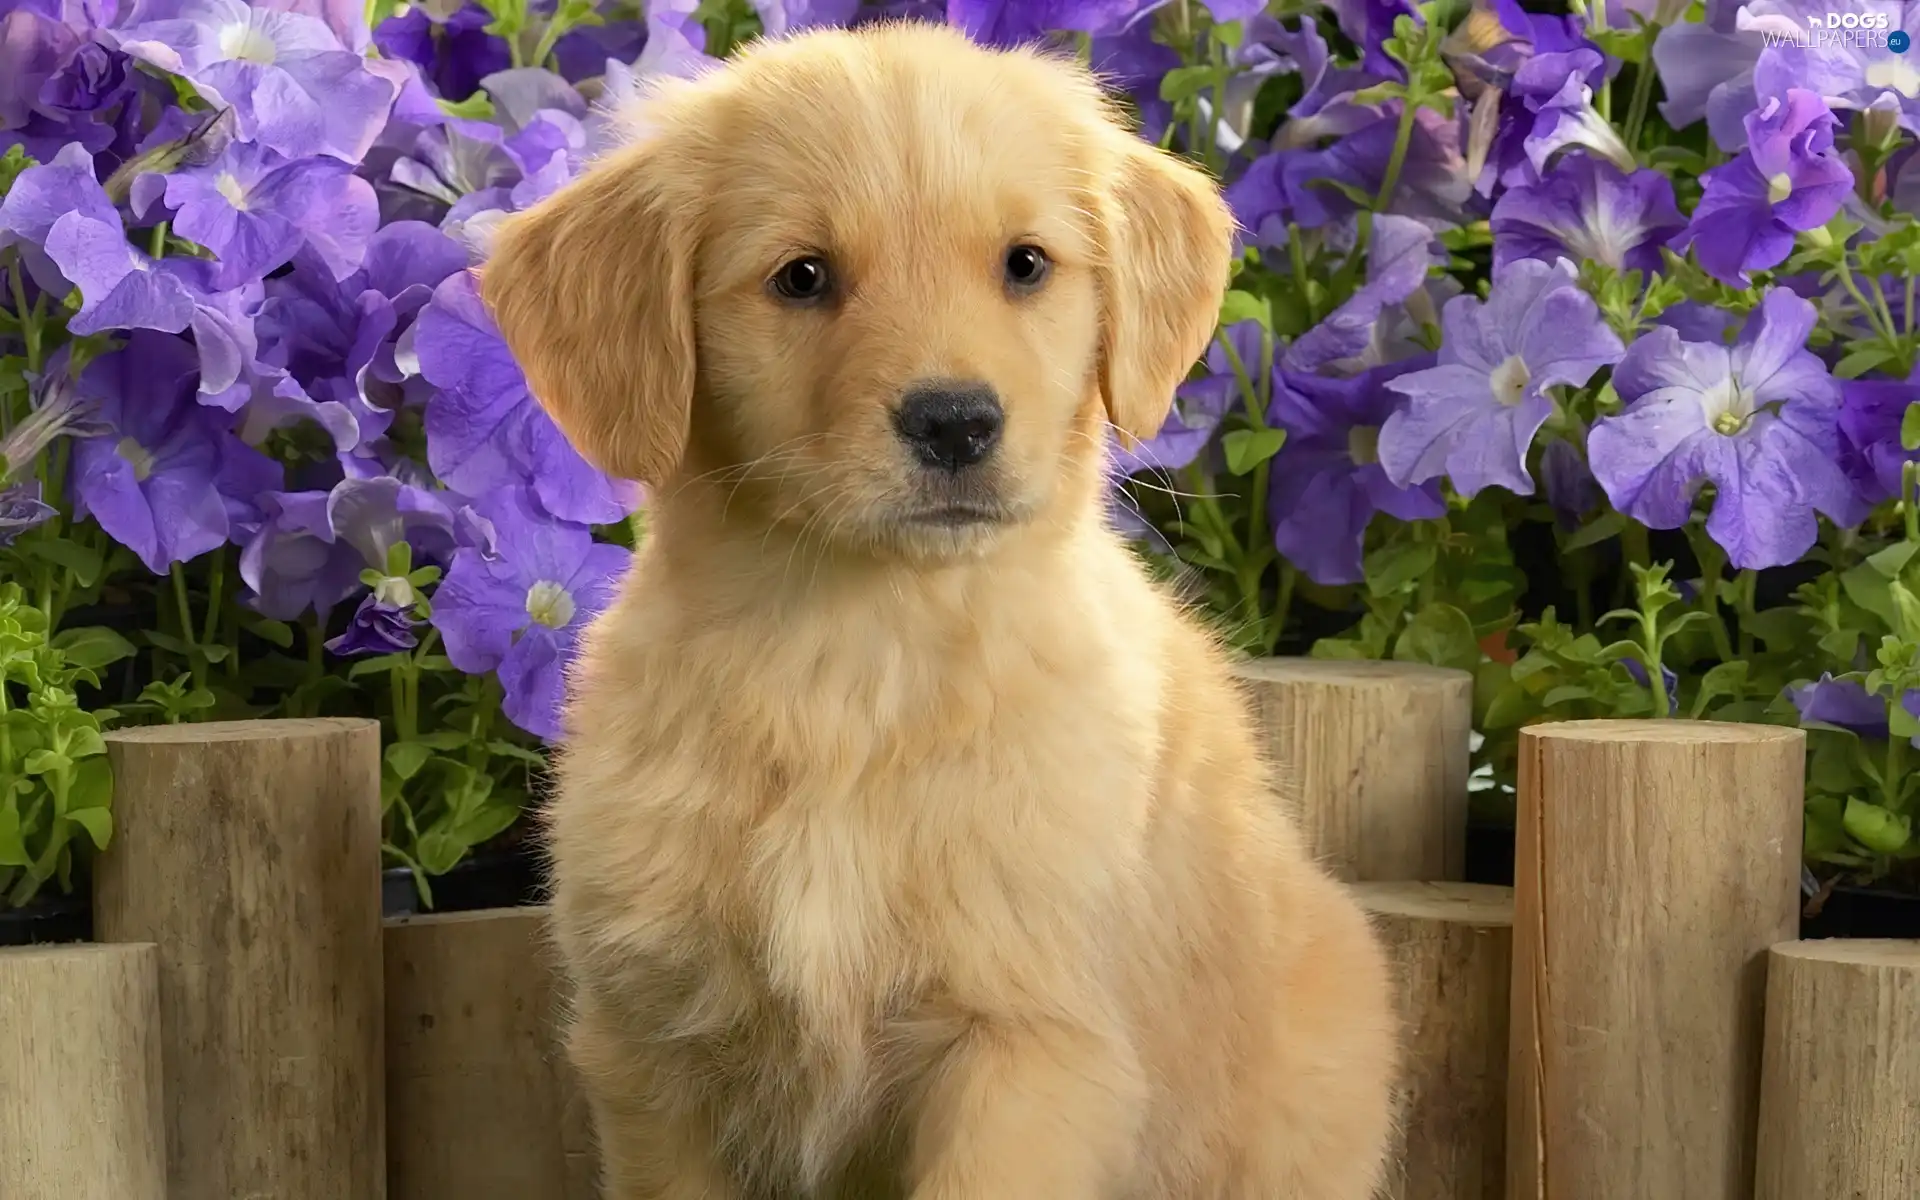 Puppy, Flowers, doggy